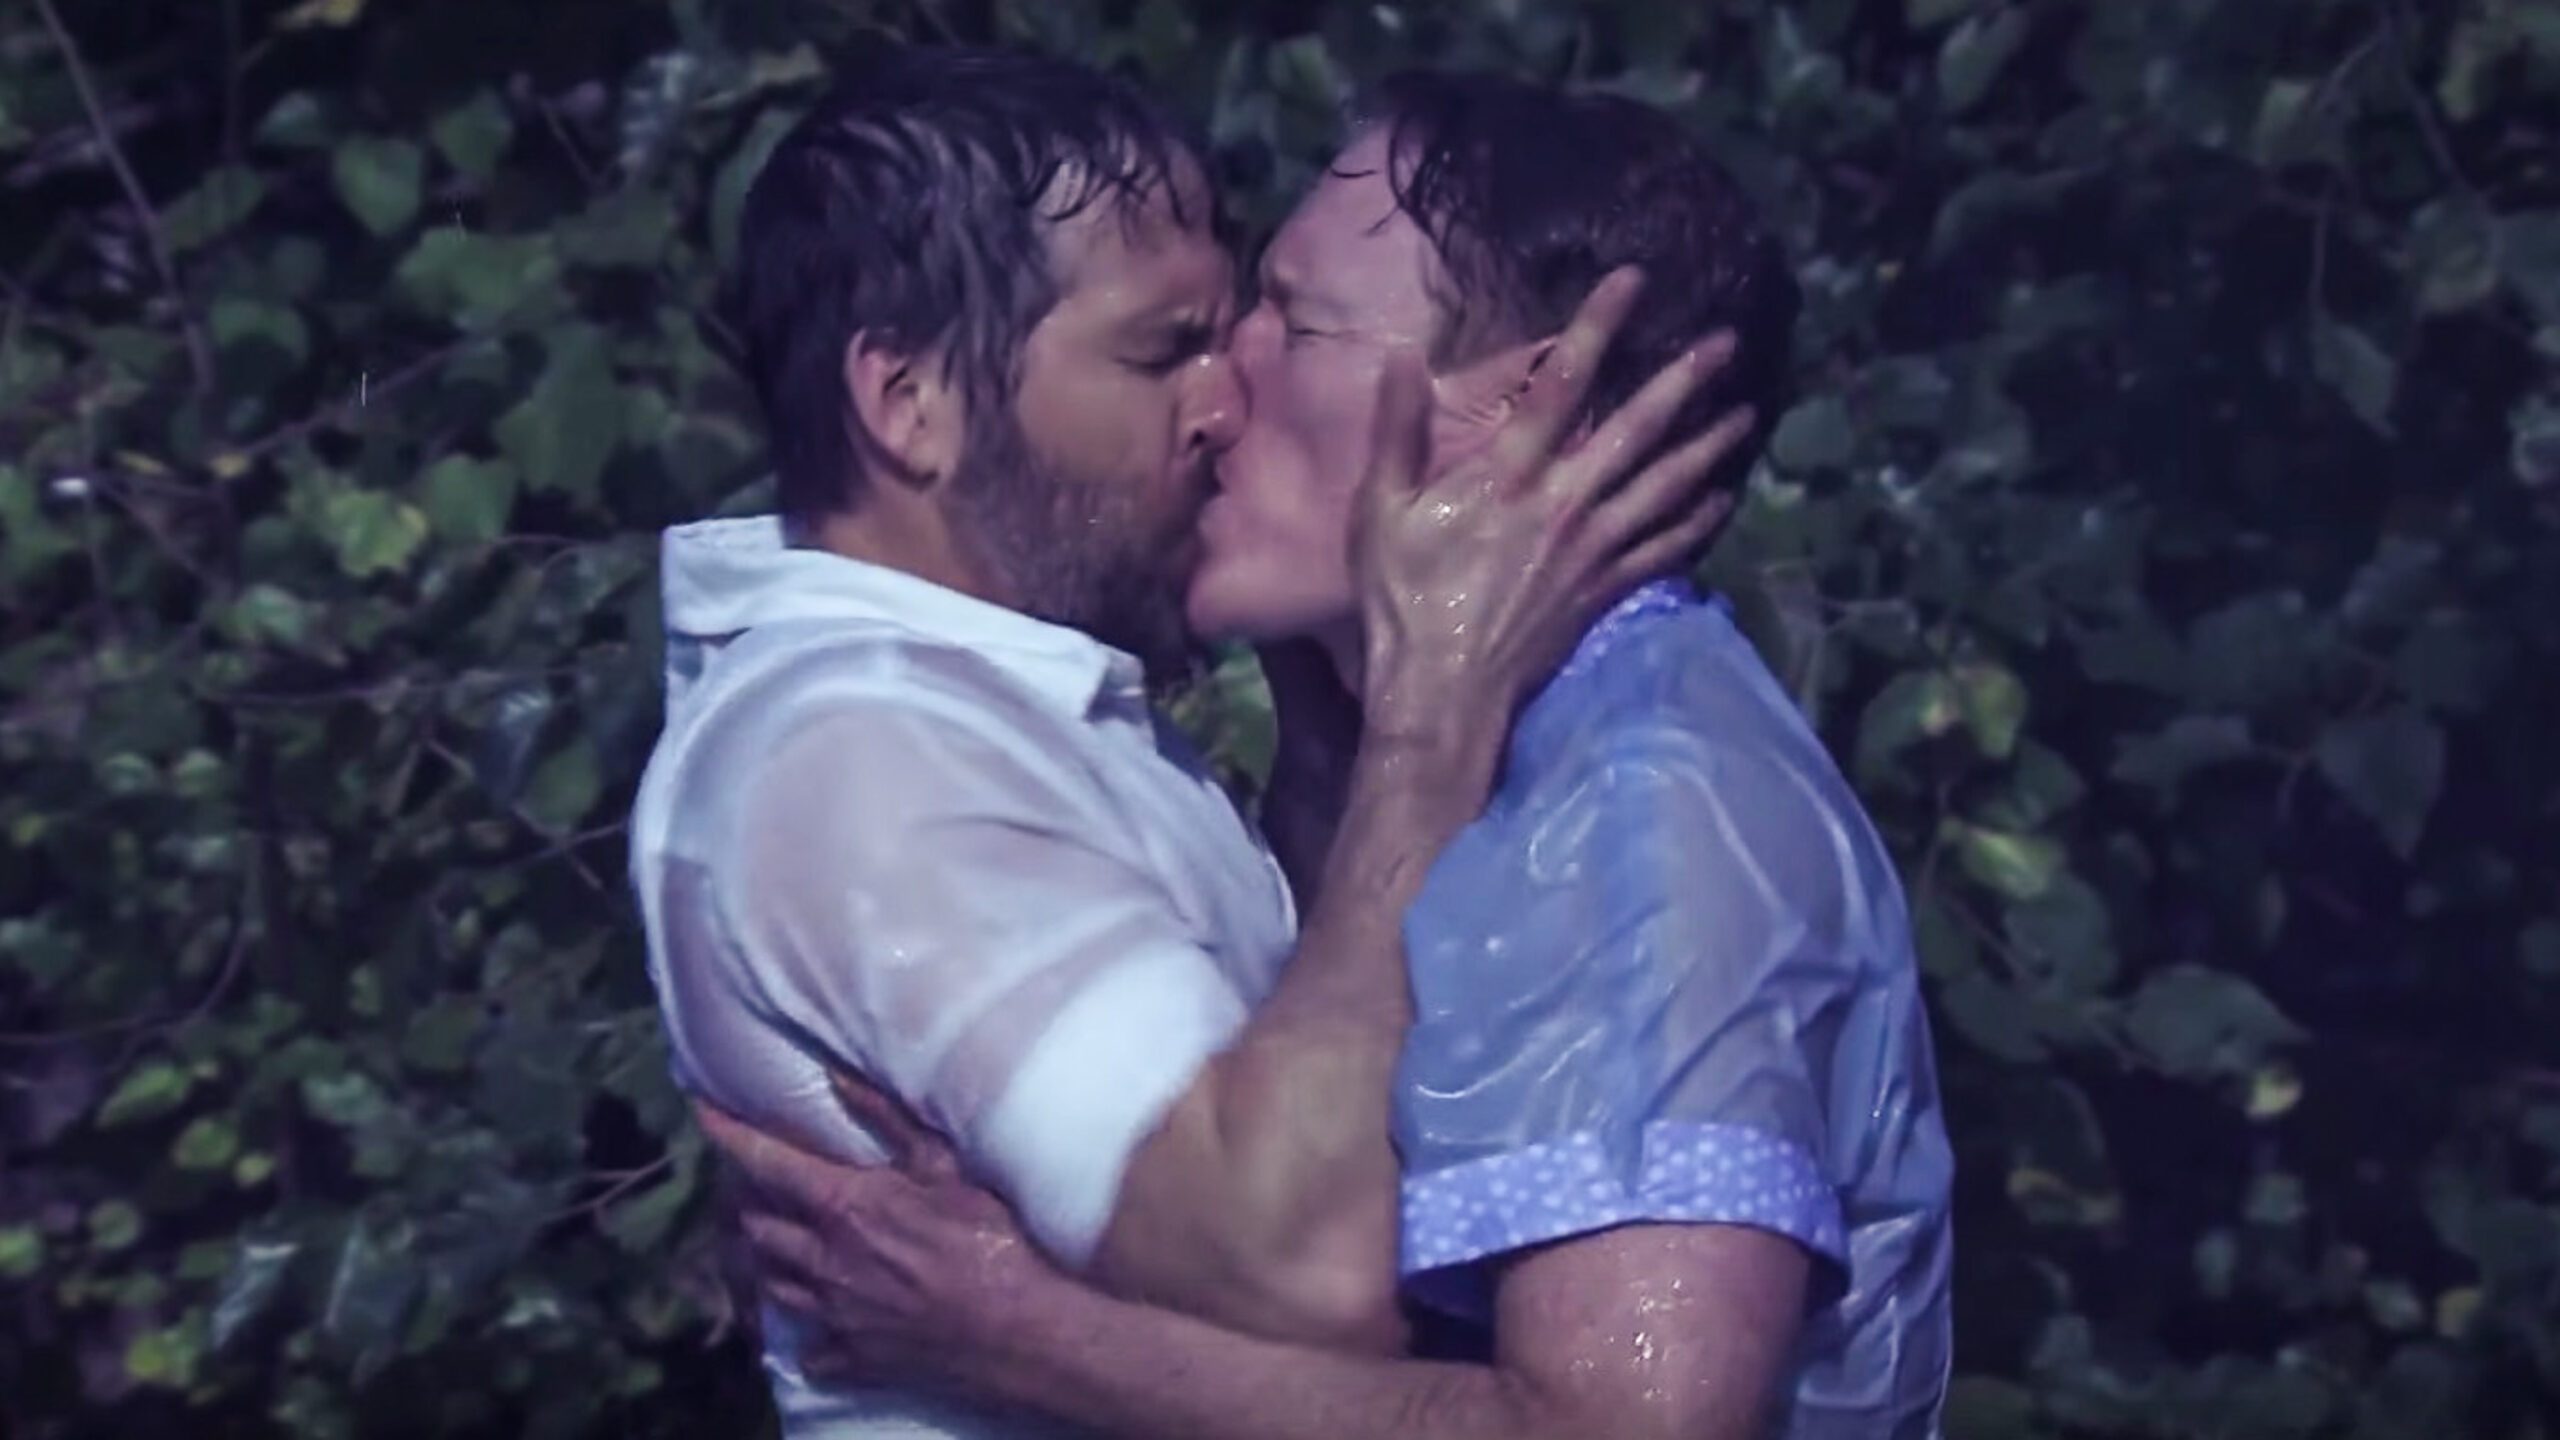 WATCH: Ryan Reynolds, Conan O’Brien have their own epic ‘The Notebook’ kiss